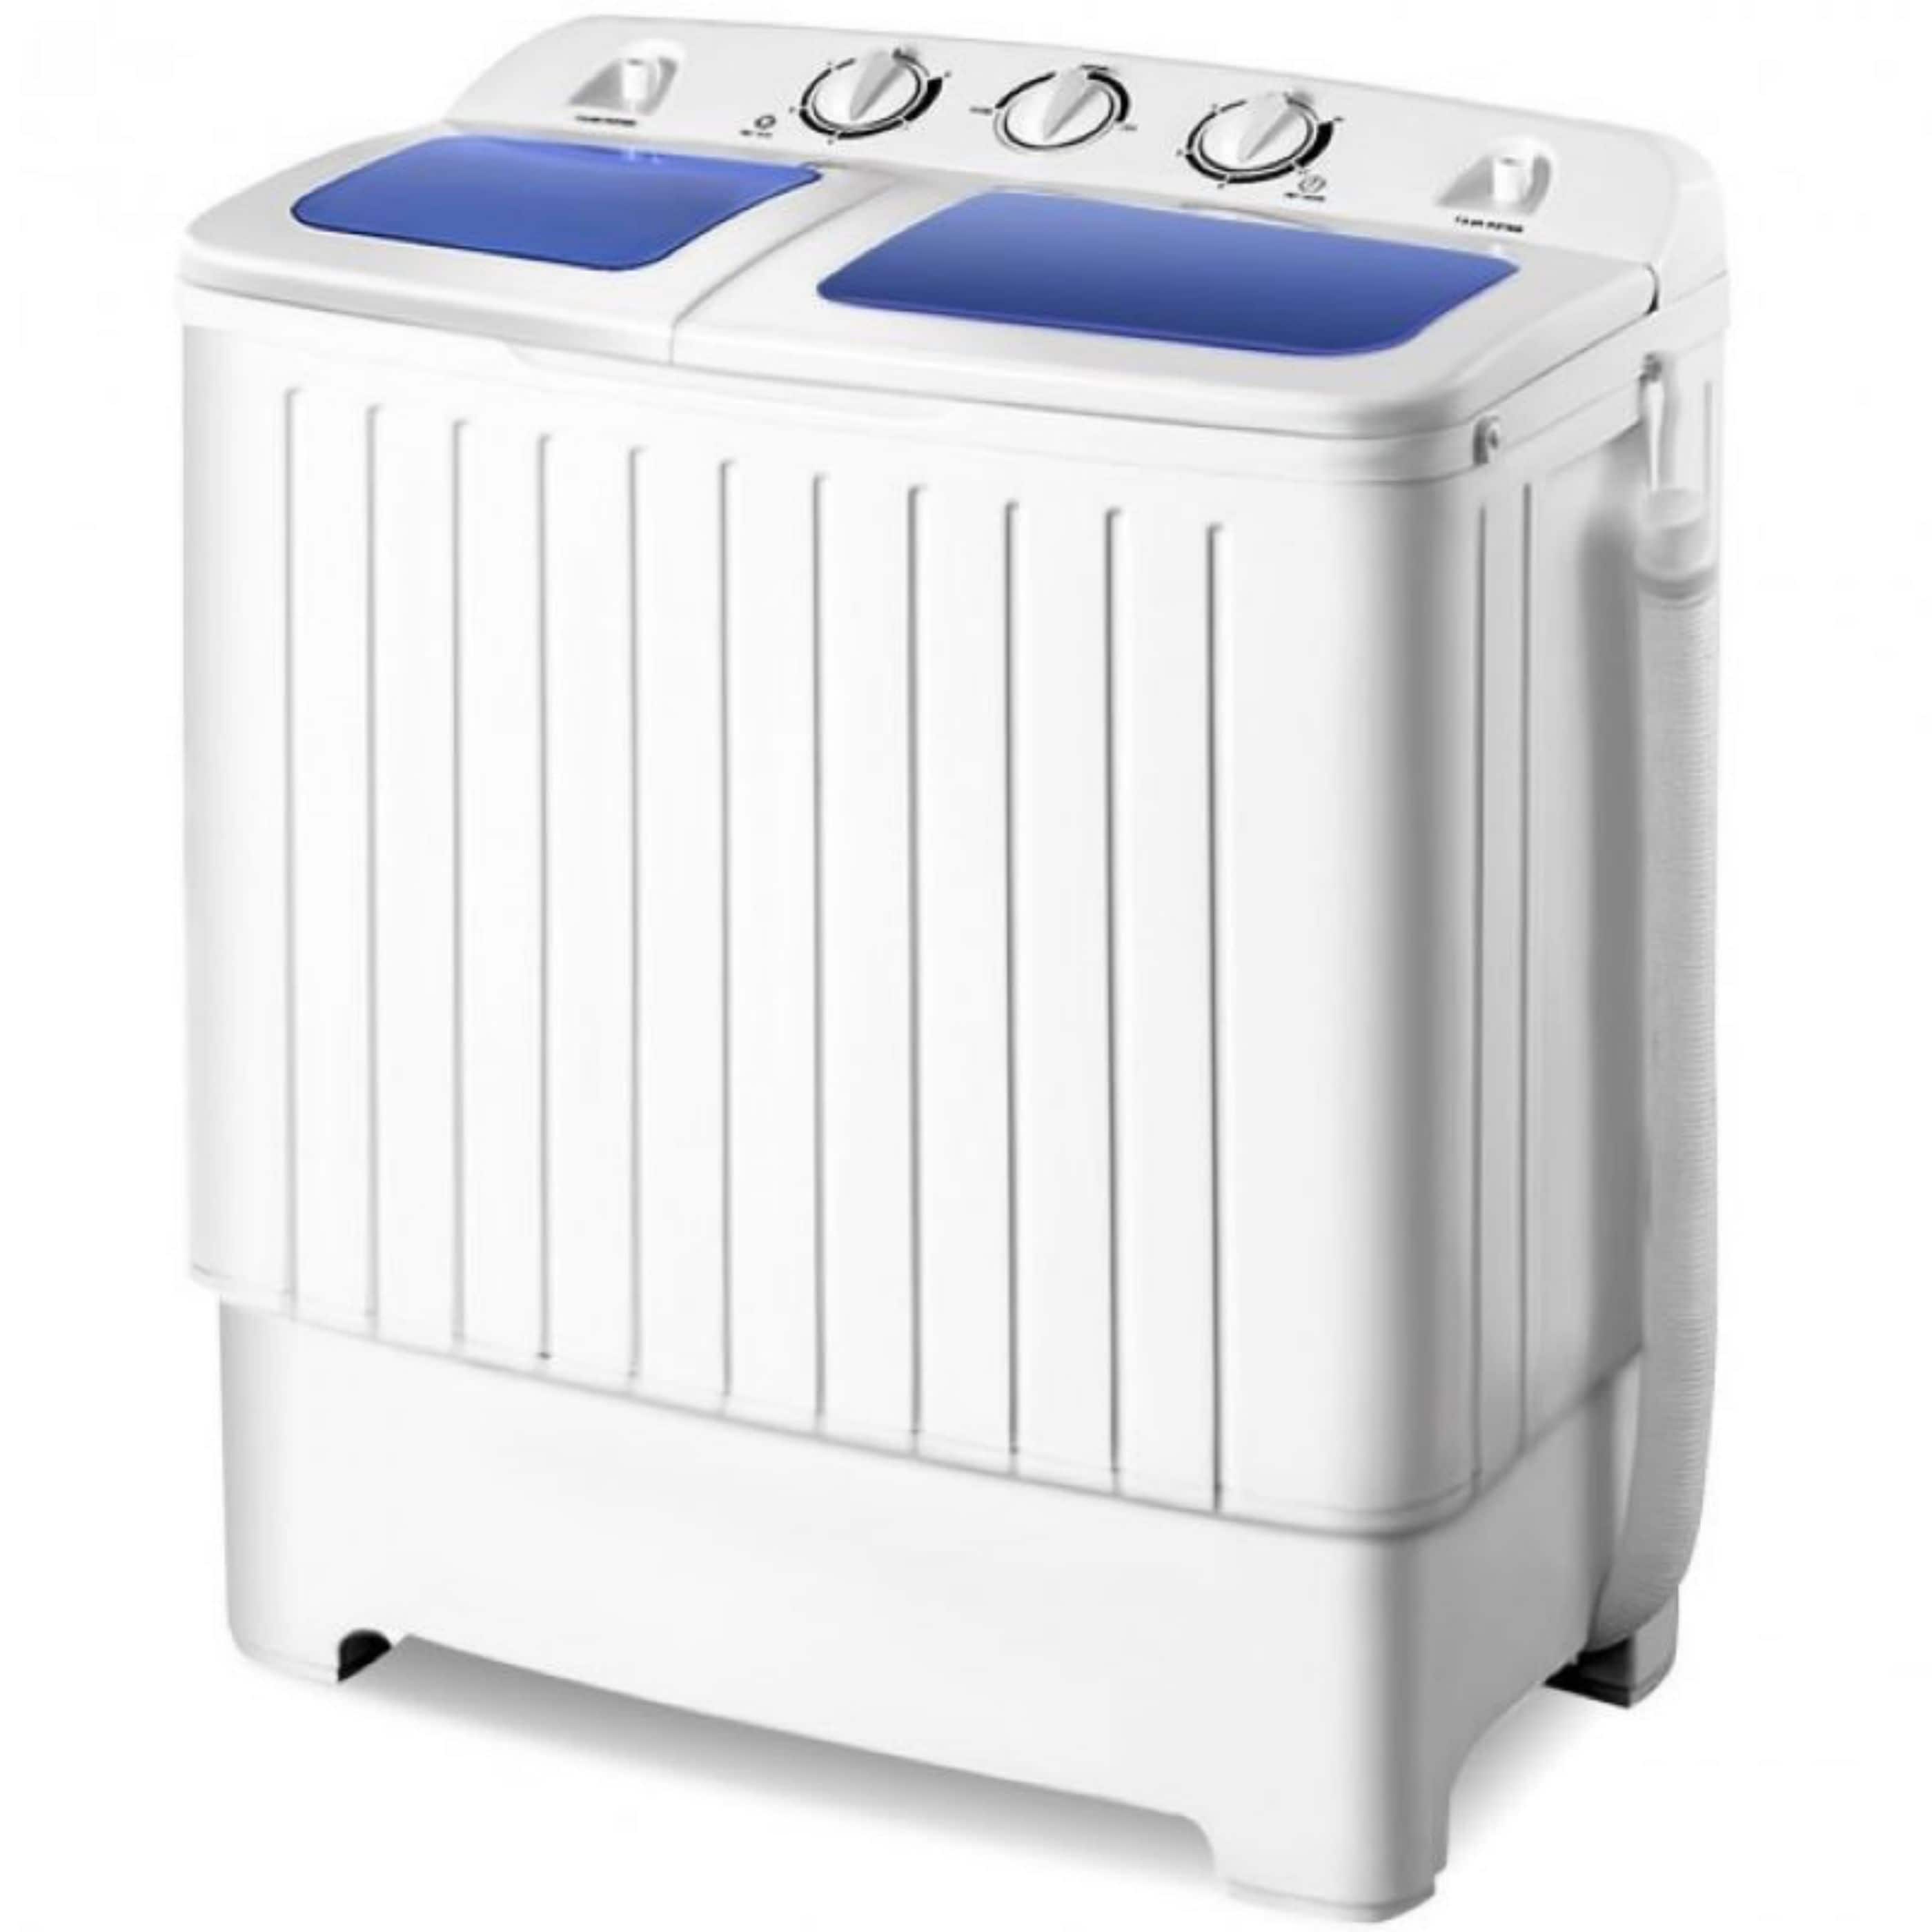 Apartments Compact Twin Tub Spin Washing Machine Dryer - Bed Bath & Beyond  - 38403914